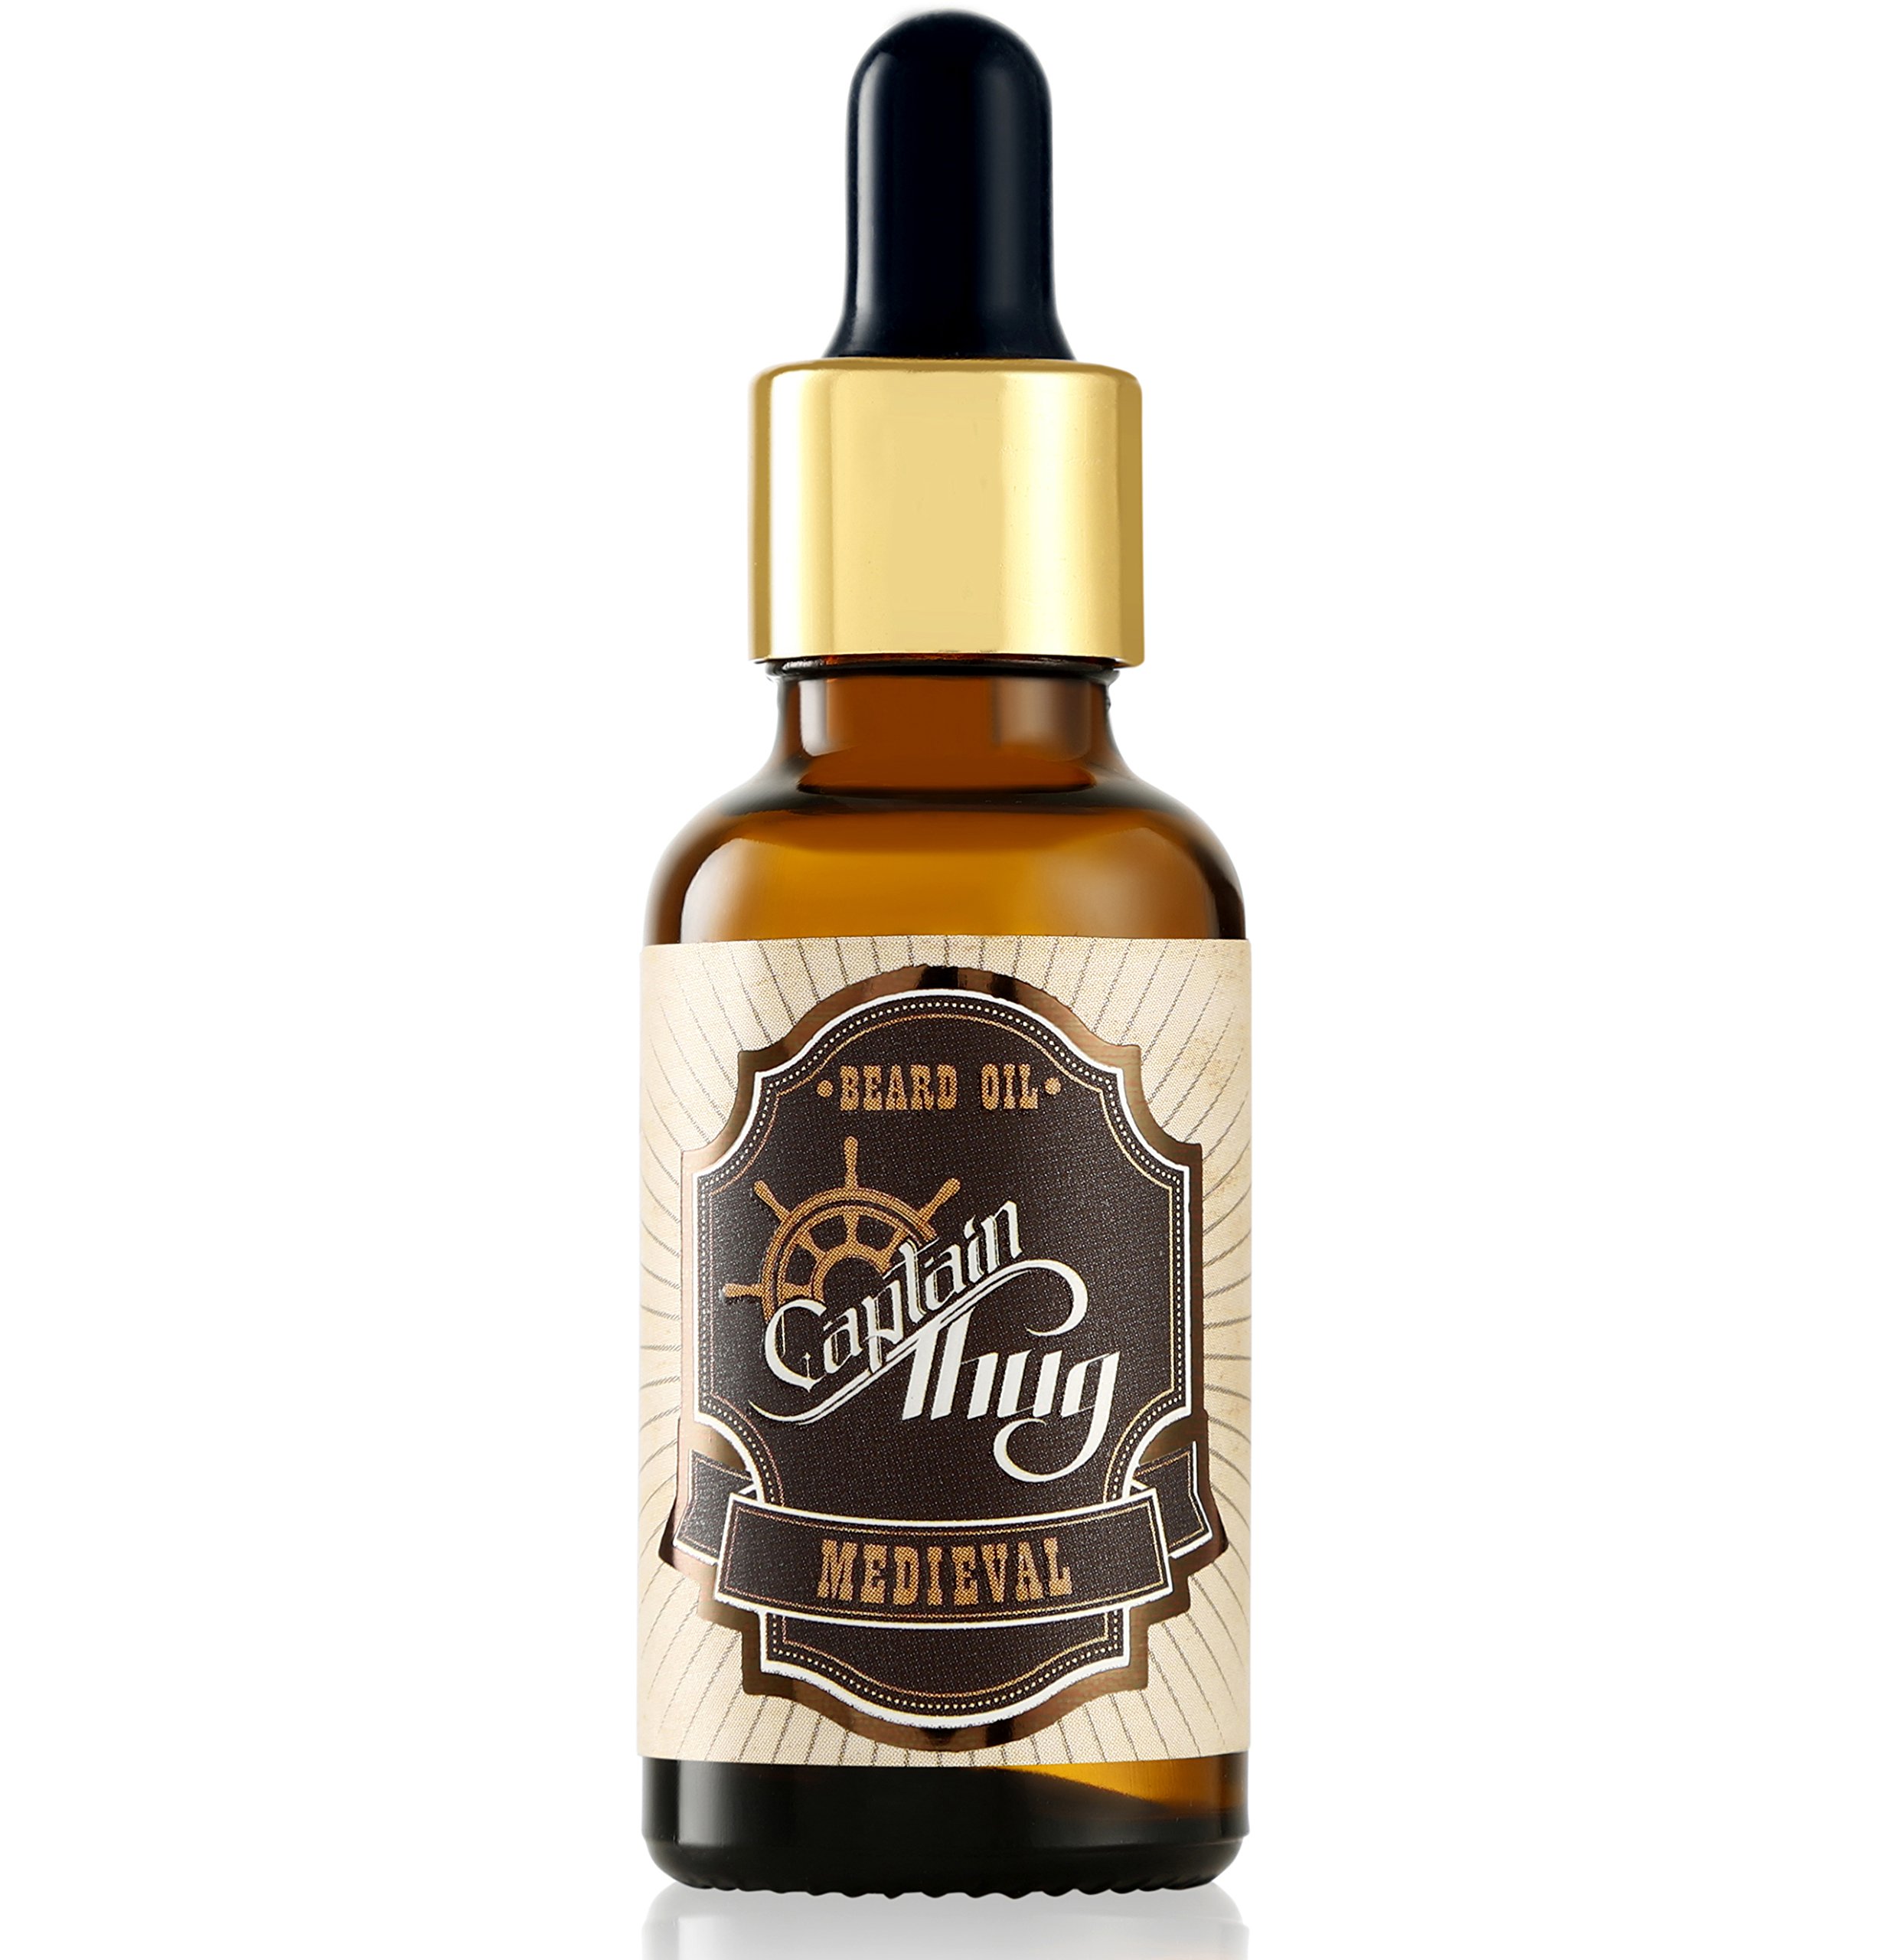 Captain Thug Medieval Beard Oil Conditioner – Ultra Premium Ayurveda – 9 Essential Oils – Softens, Smooths & Strengthens Beard Growth – Grooming Beard and Mustache Nourishment Treatment – 1 fl. oz.